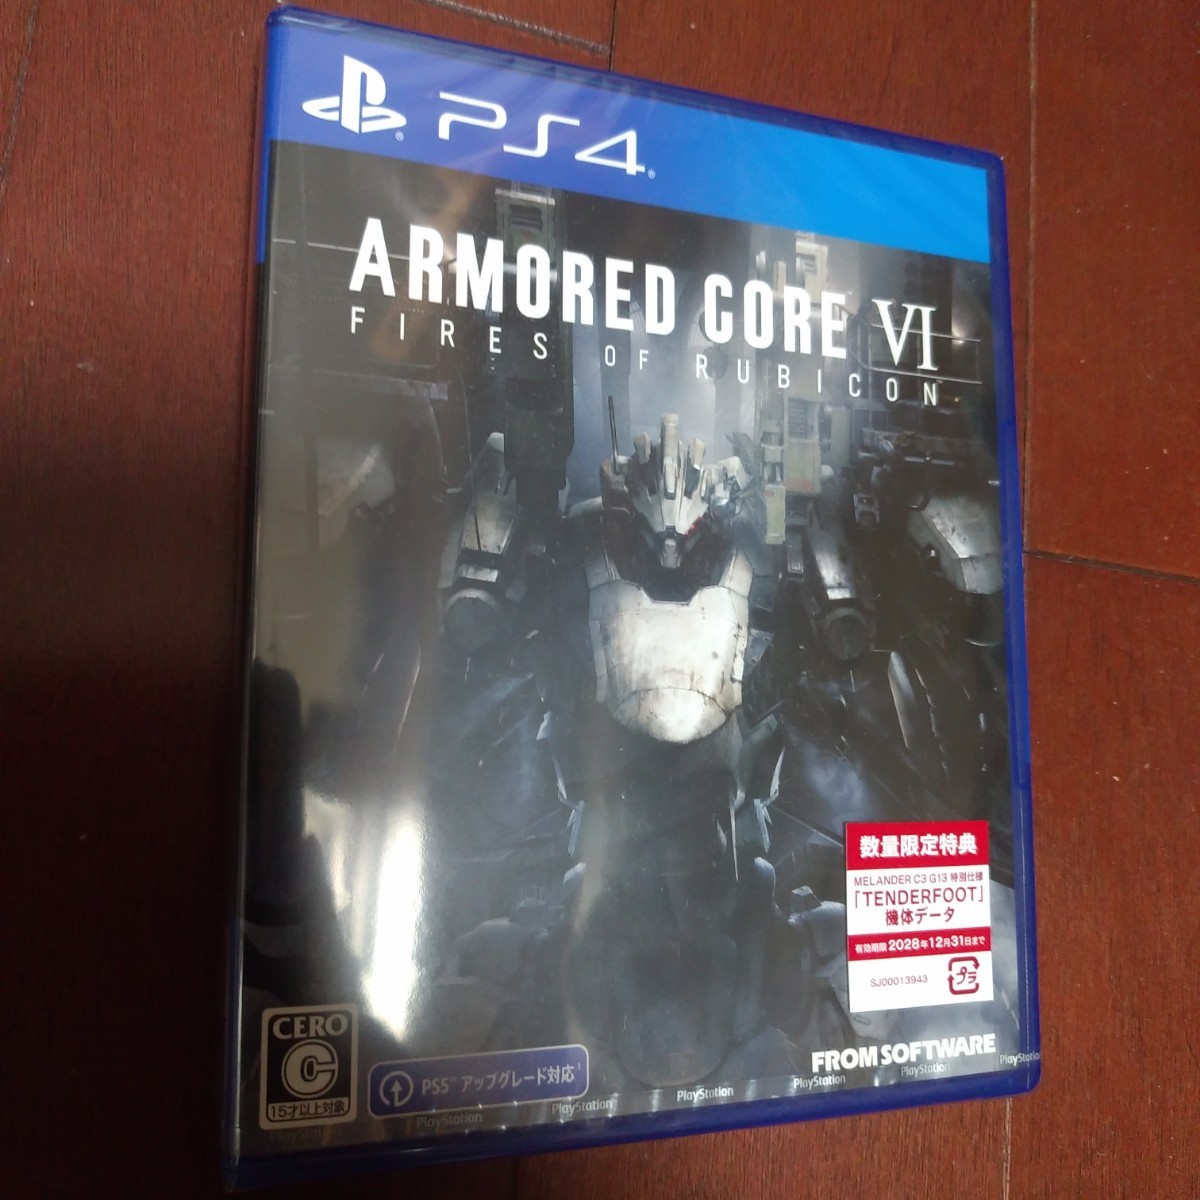 【PS4】 ARMORED CORE VI FIRES OF RUBICON アーマードコア6 新品未開封 初回特典コード付き